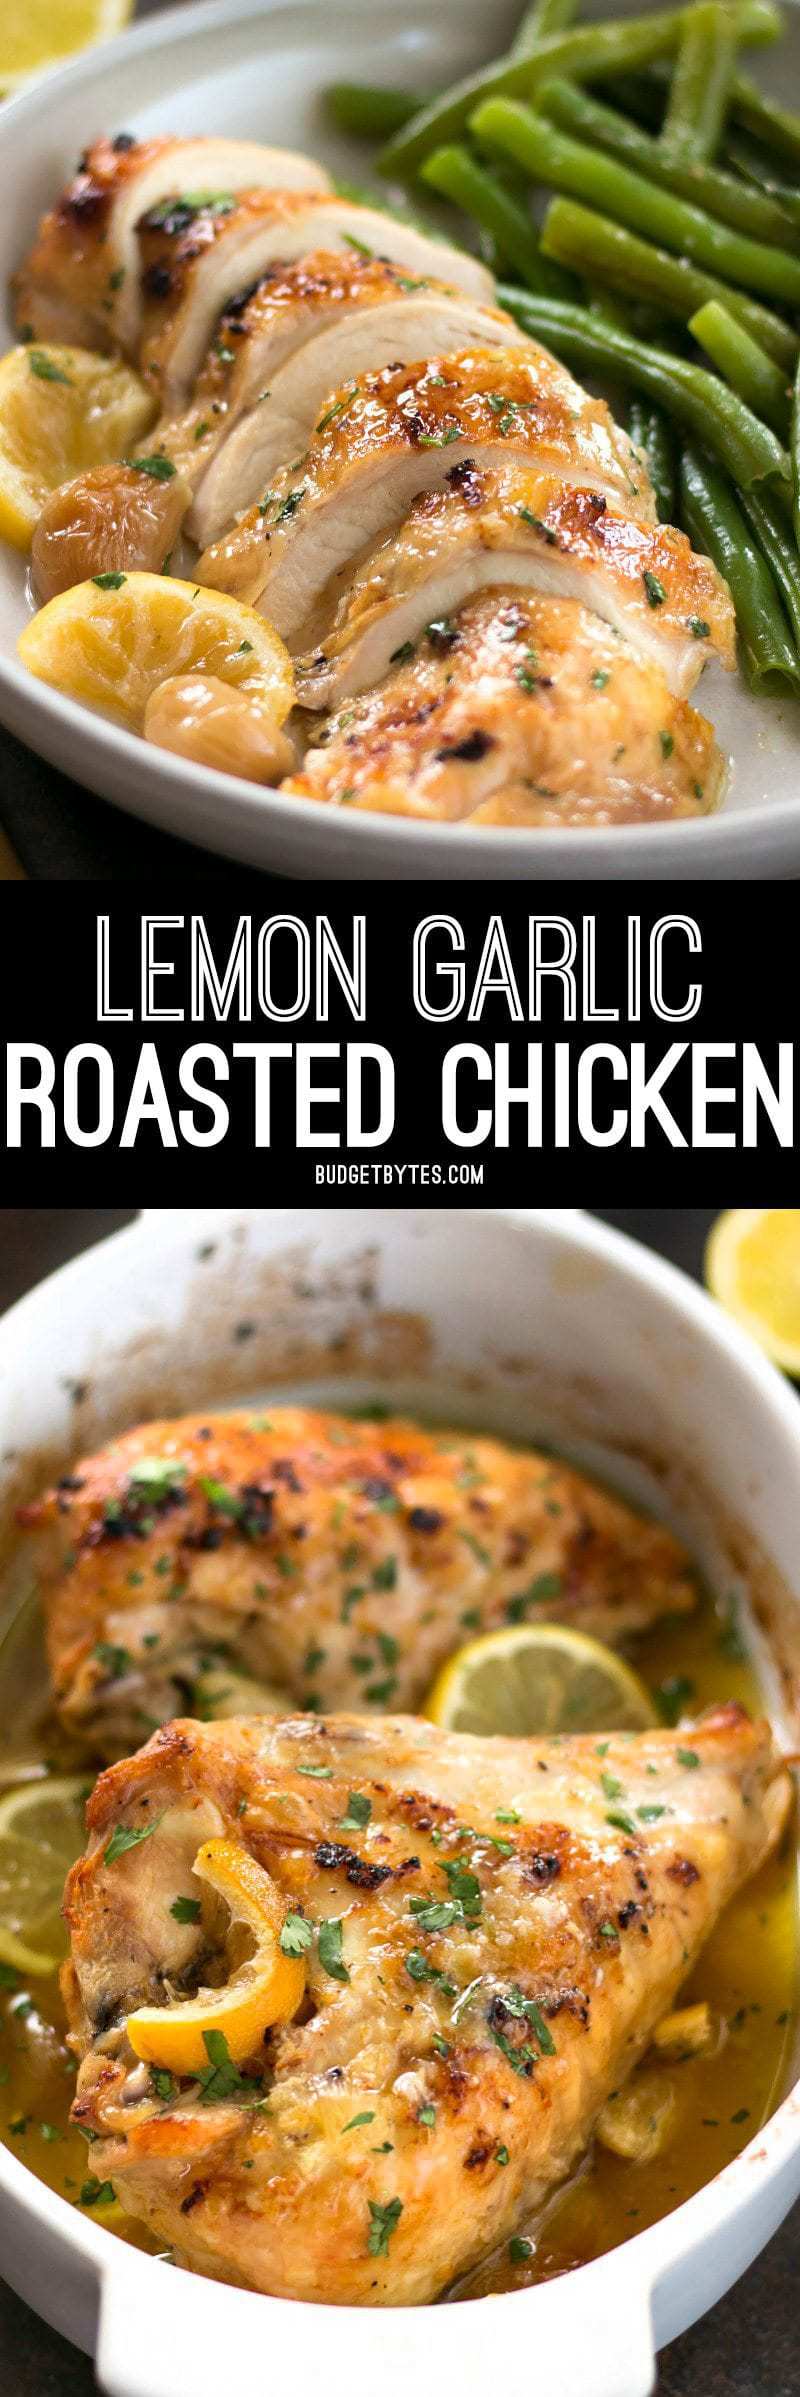 This low and slow cooking method makes this Lemon Garlic Roasted Chicken incredibly tender, juicy, and flavorful! BudgetBytes.com